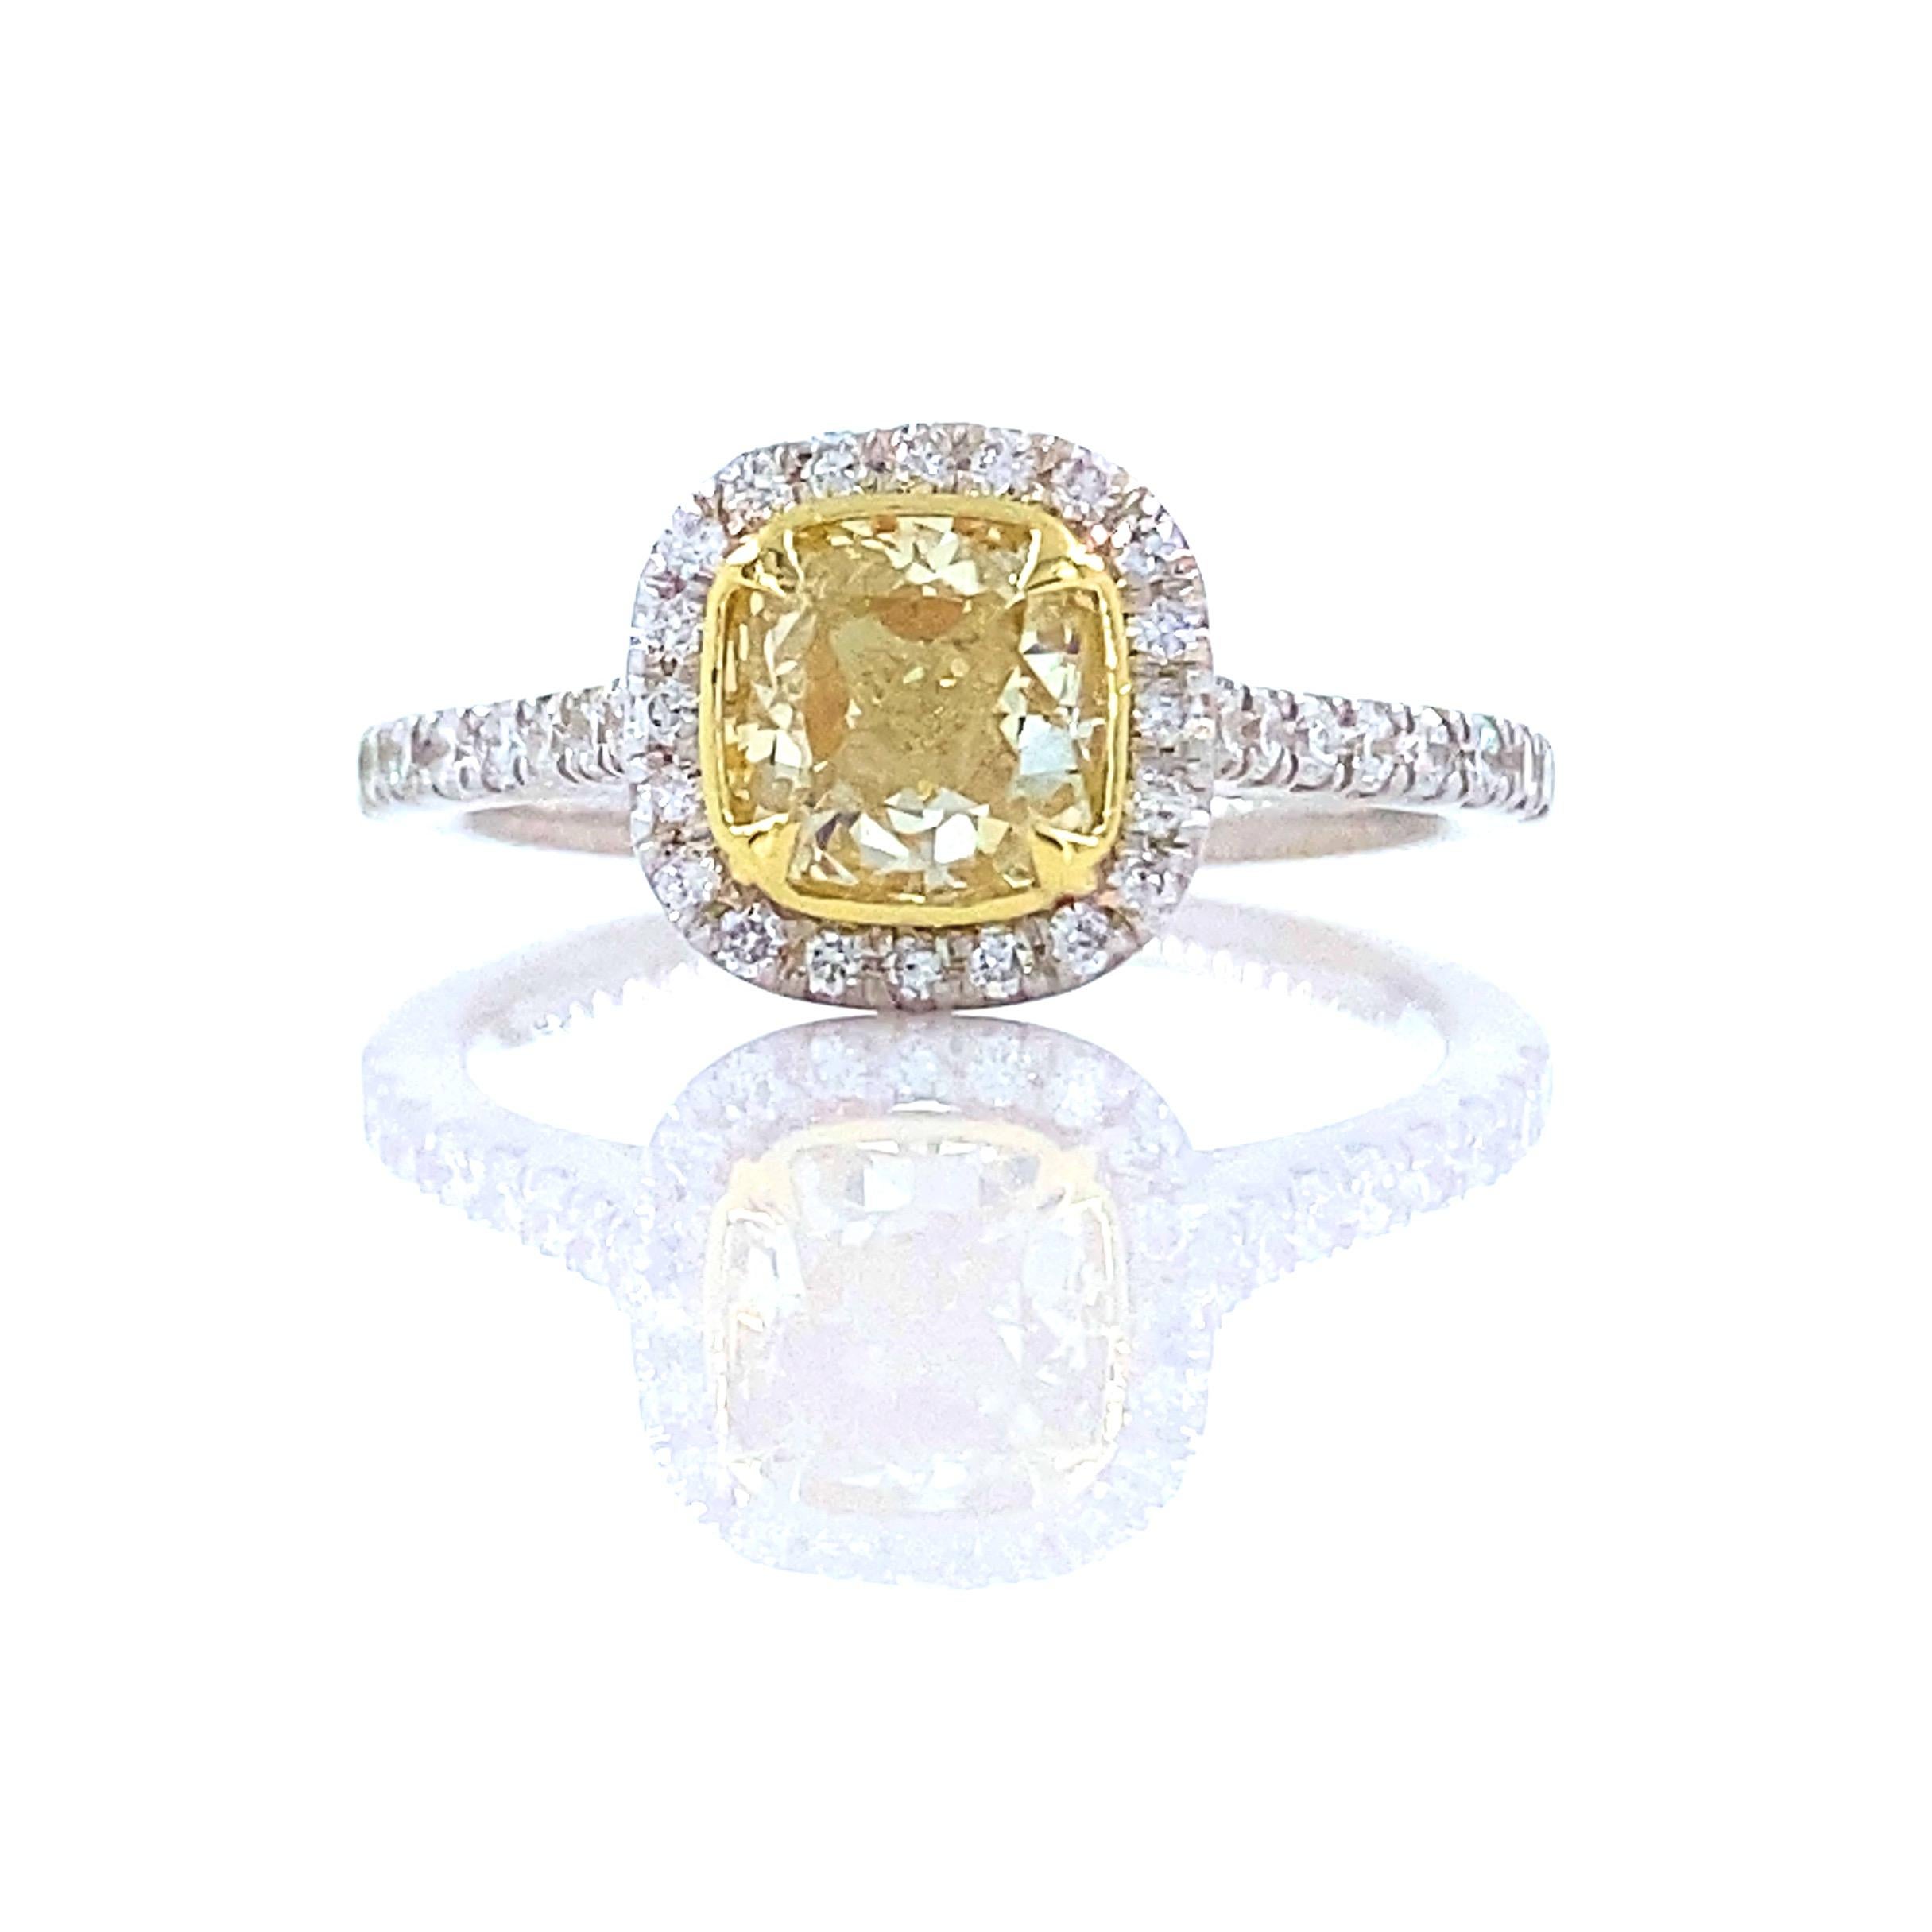 Fancy Yellow Cushion Diamond 1.37 Tcw Halo Design Engagement Ring 18kt WG and YG For Sale 1